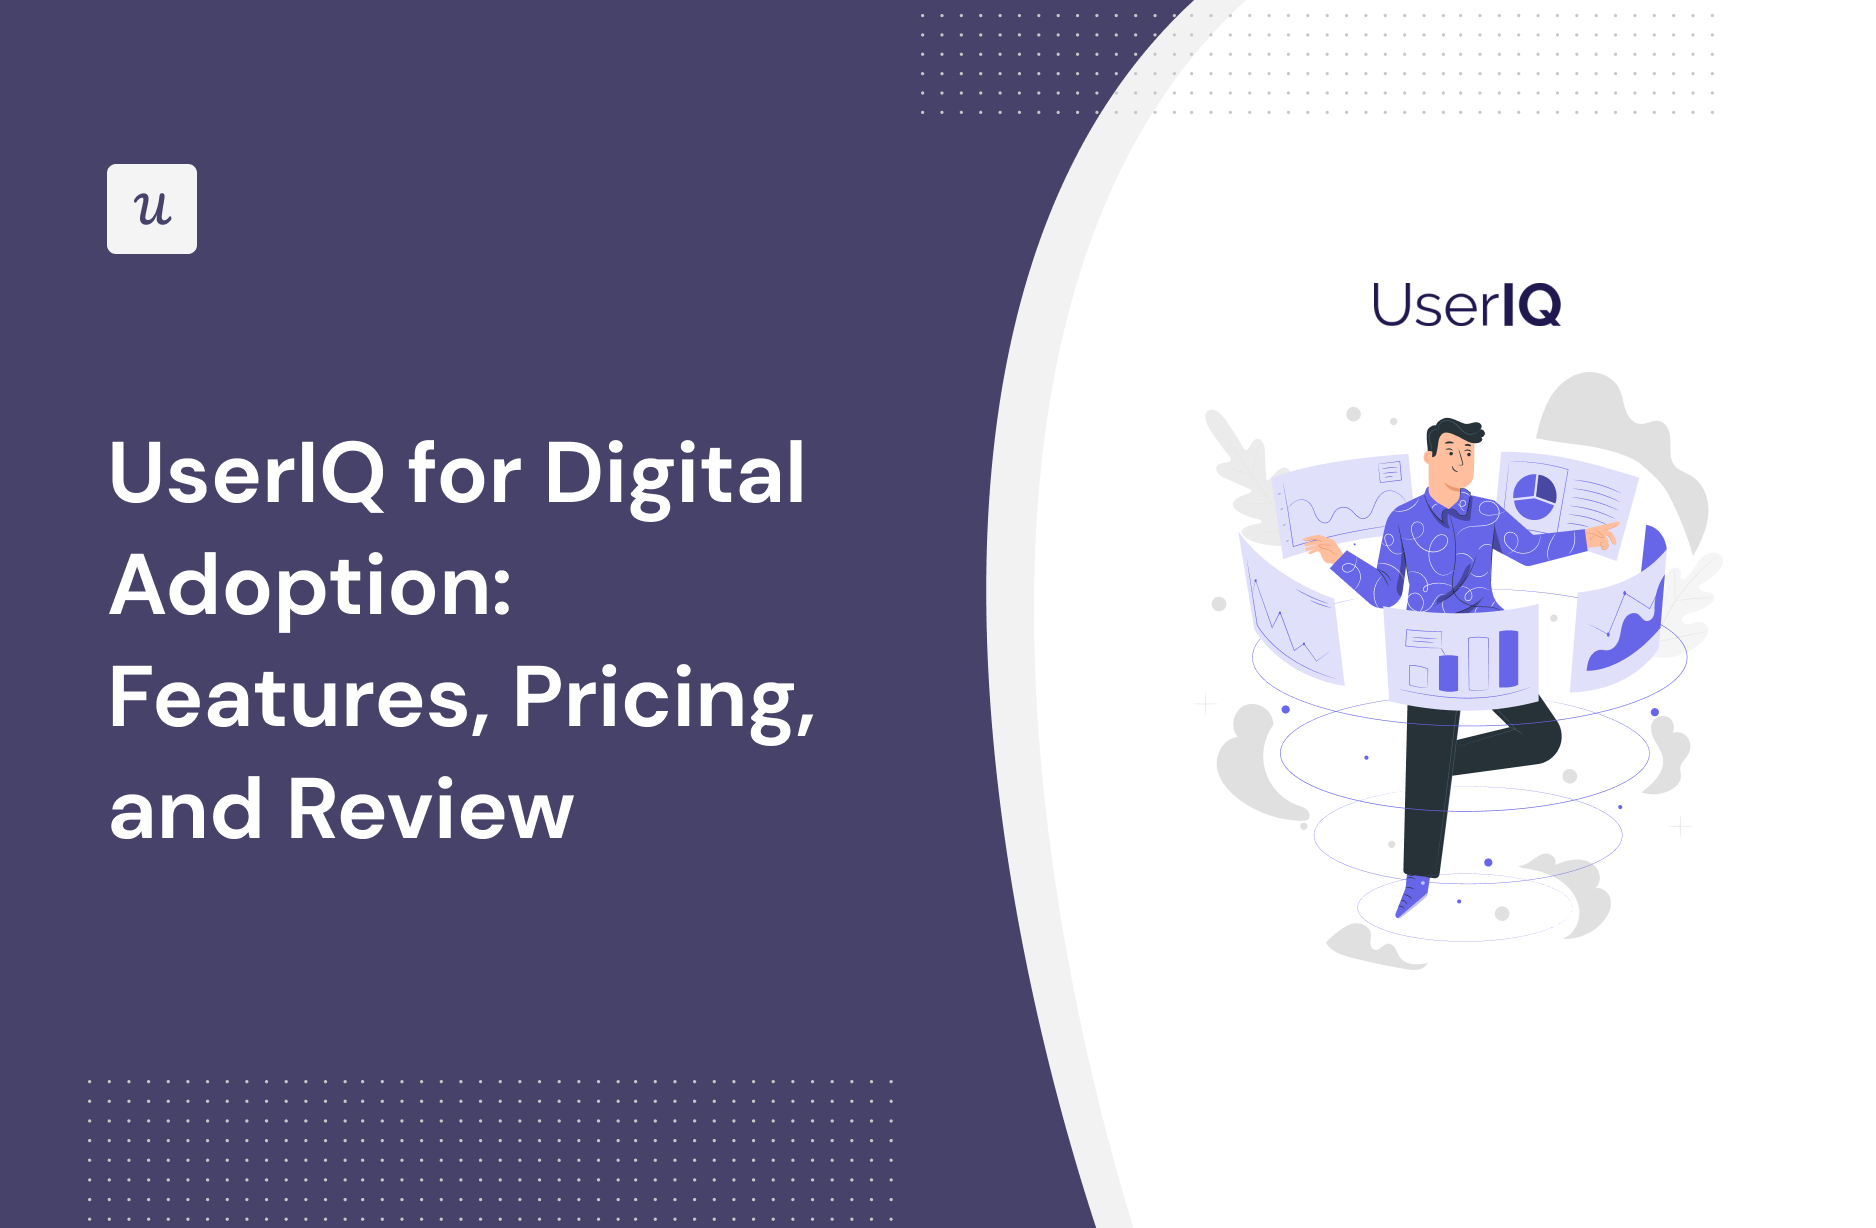 UserIQ for Digital Adoption: Features, Pricing, and Review